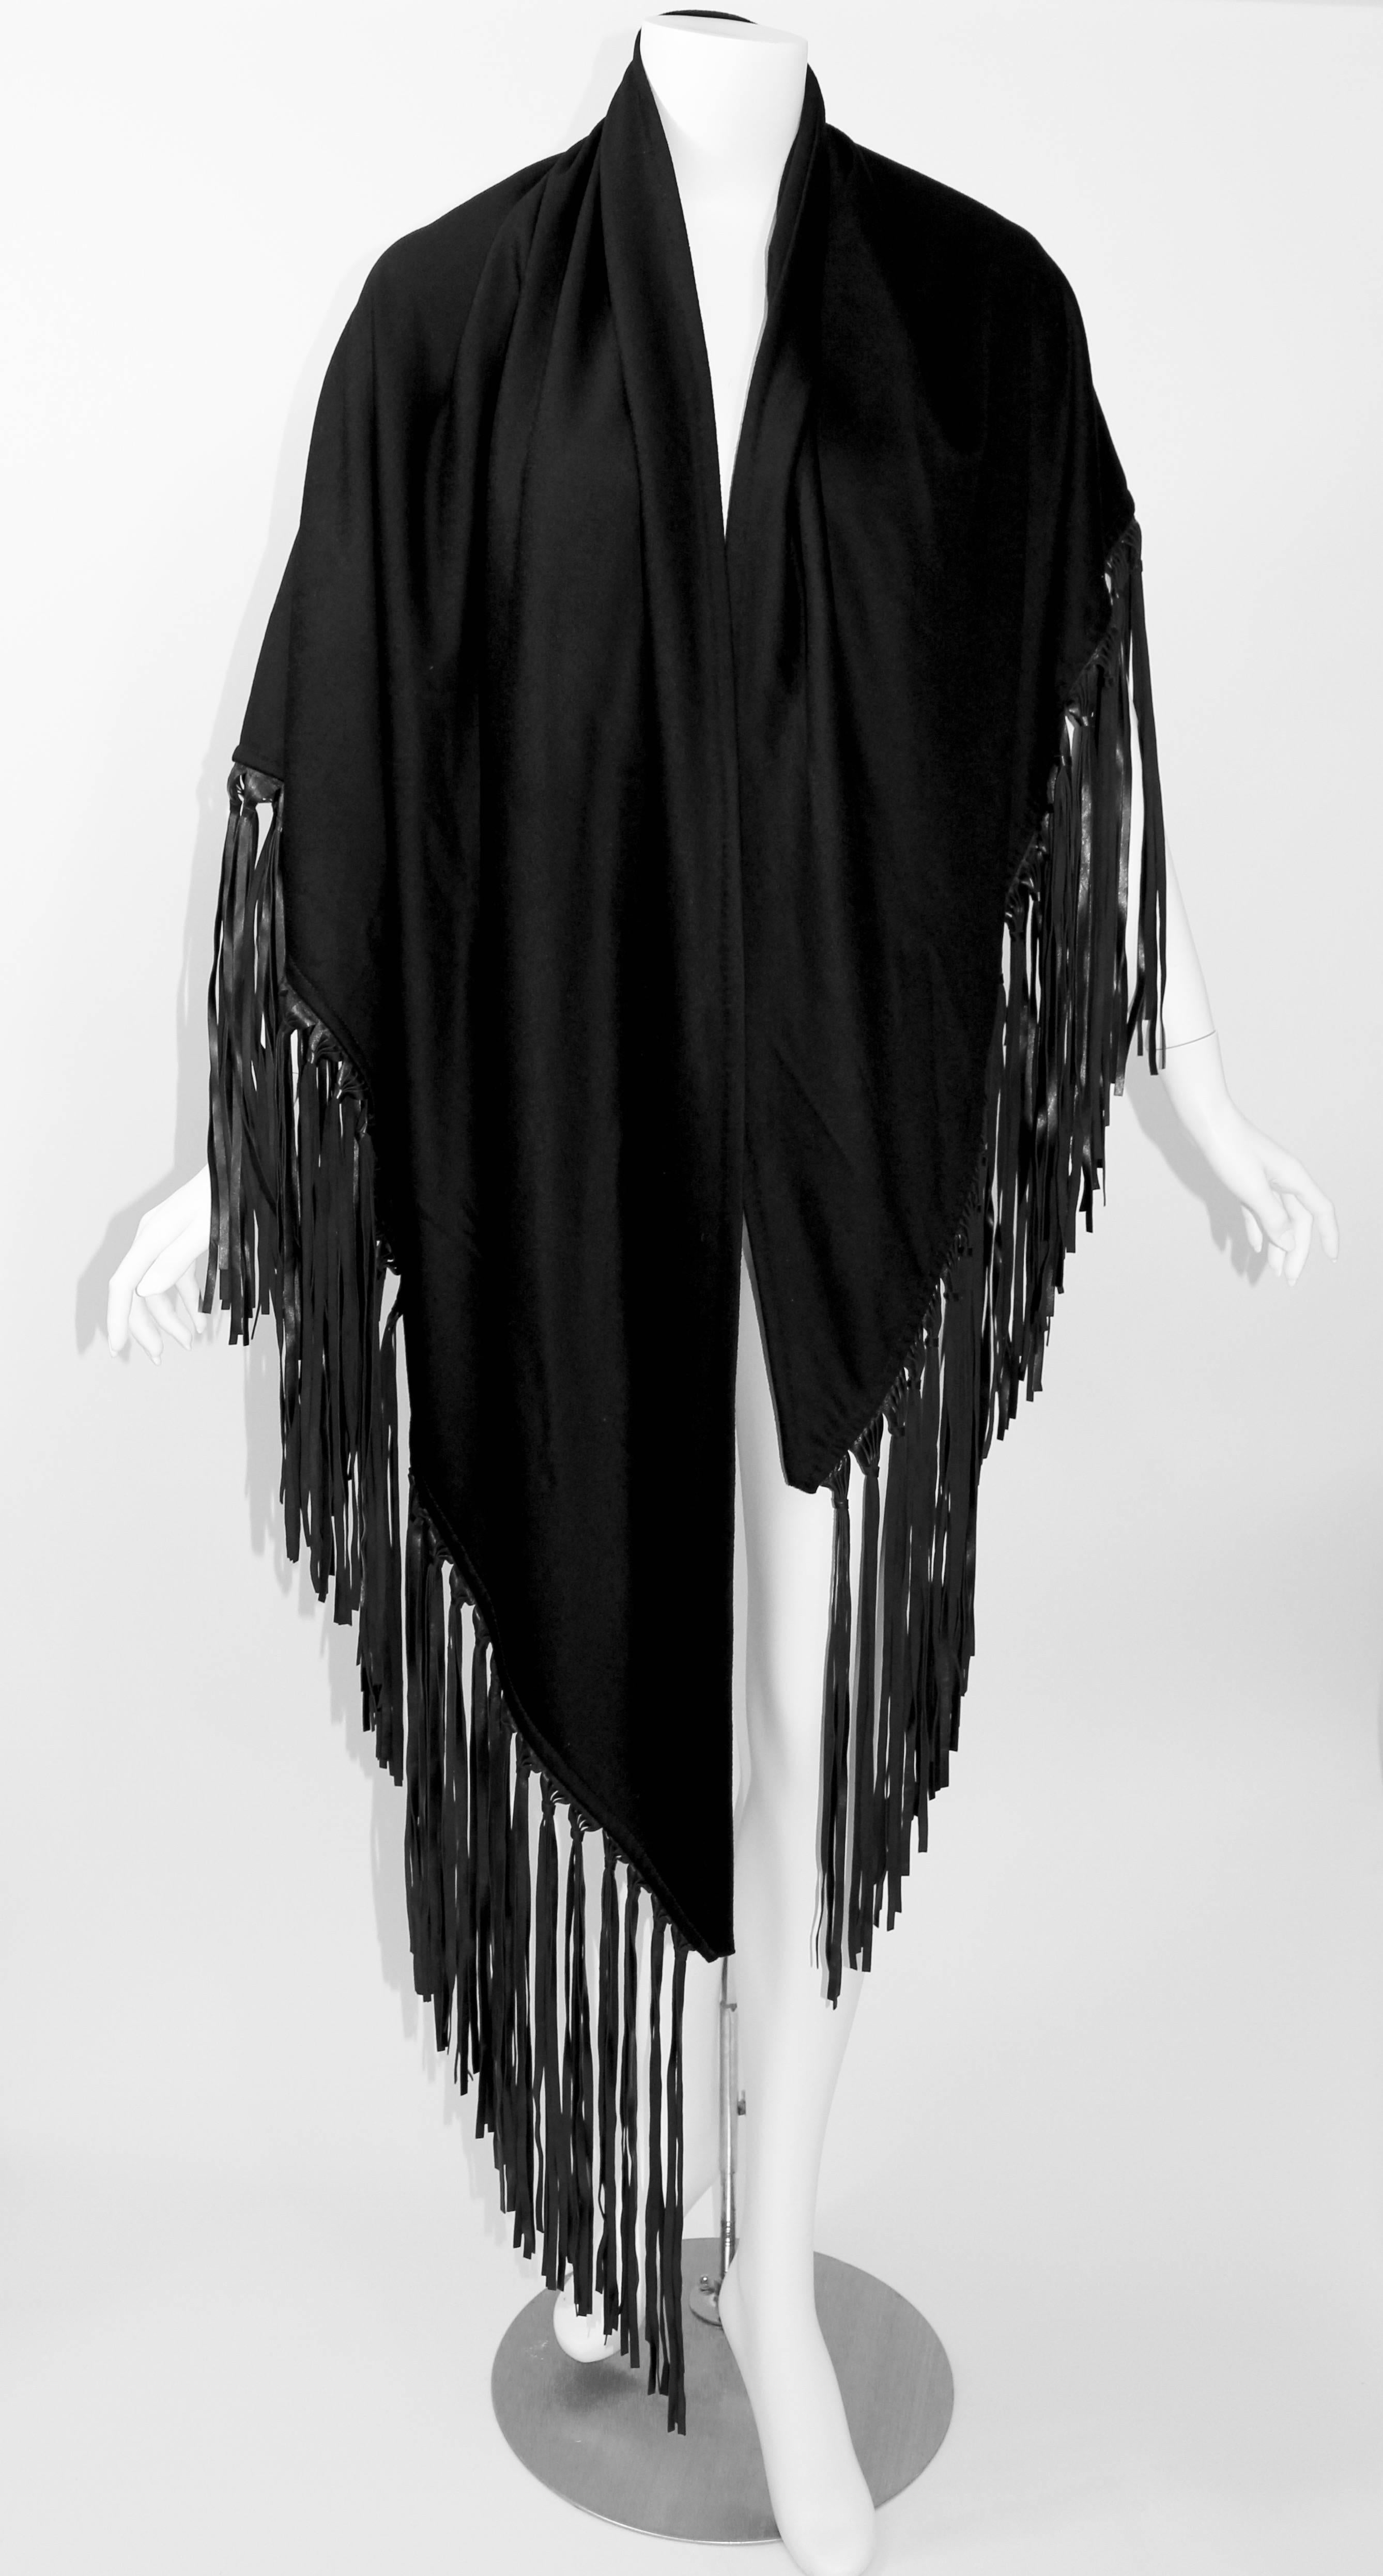 A large black Hermes vintage super soft cashmere shawl with long knotted supple leather fringe. 
Triangle shape.
Excellent condition. 
This is Hermes, label was lost in dry cleaning. 

Excellent condition. 

Measurements:
Widest part top of